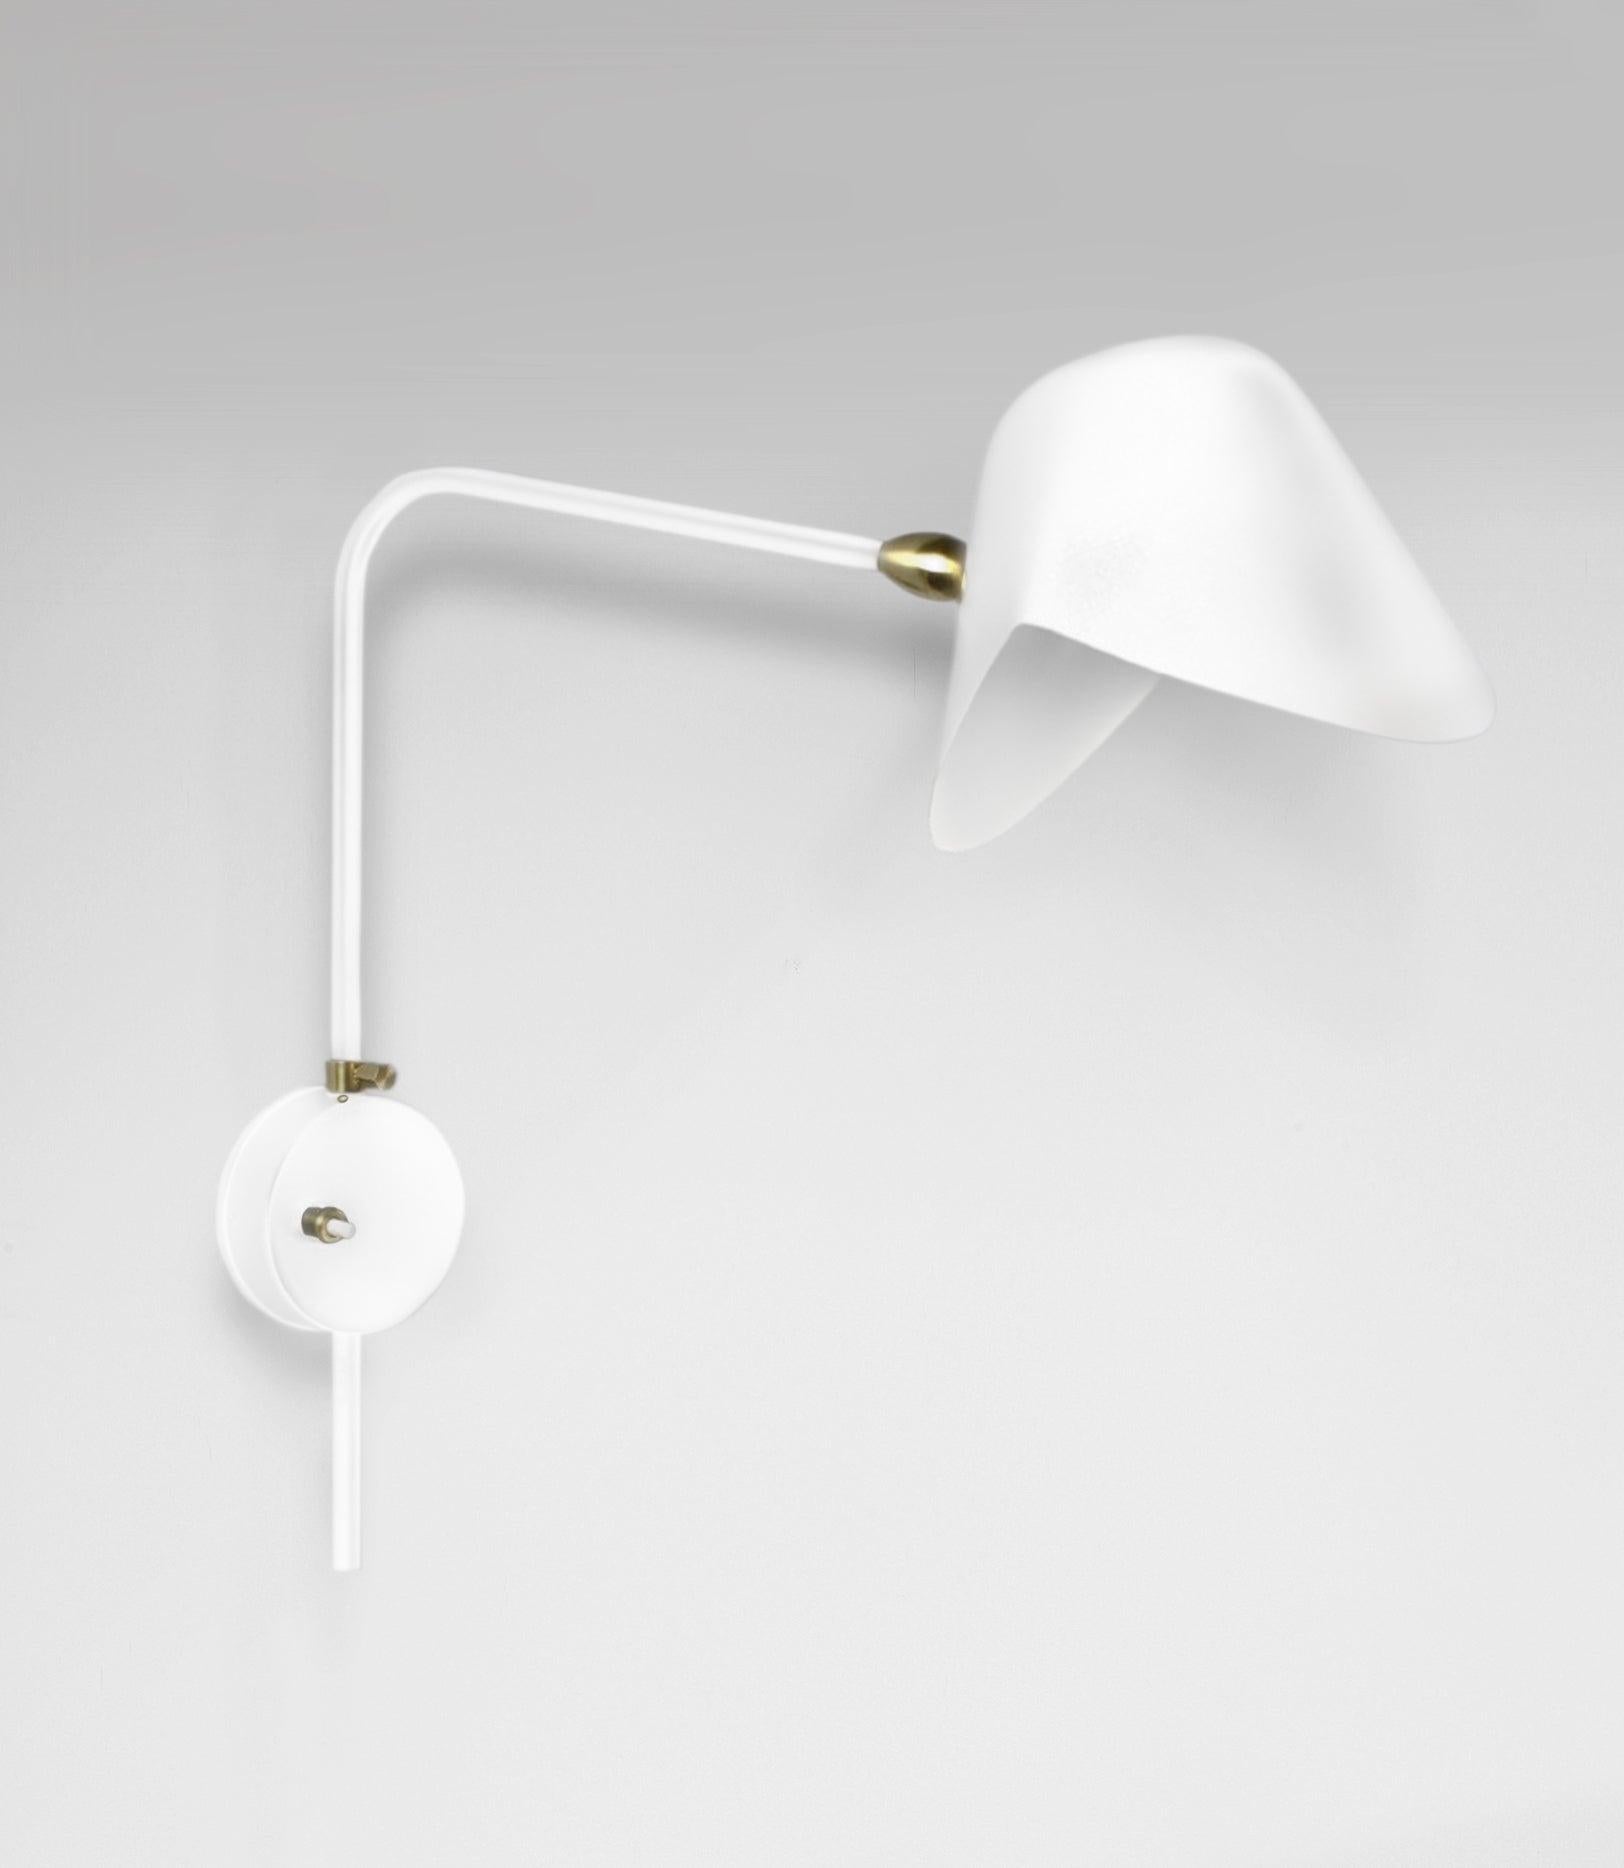 Wall sconce lamp model 'Anthony Wall Lamp With Round Fixation Box' designed by Serge Mouille in 1953.

Manufactured by Editions Serge Mouille in France. The production of lamps, wall lights and floor lamps are manufactured using craftsman’s